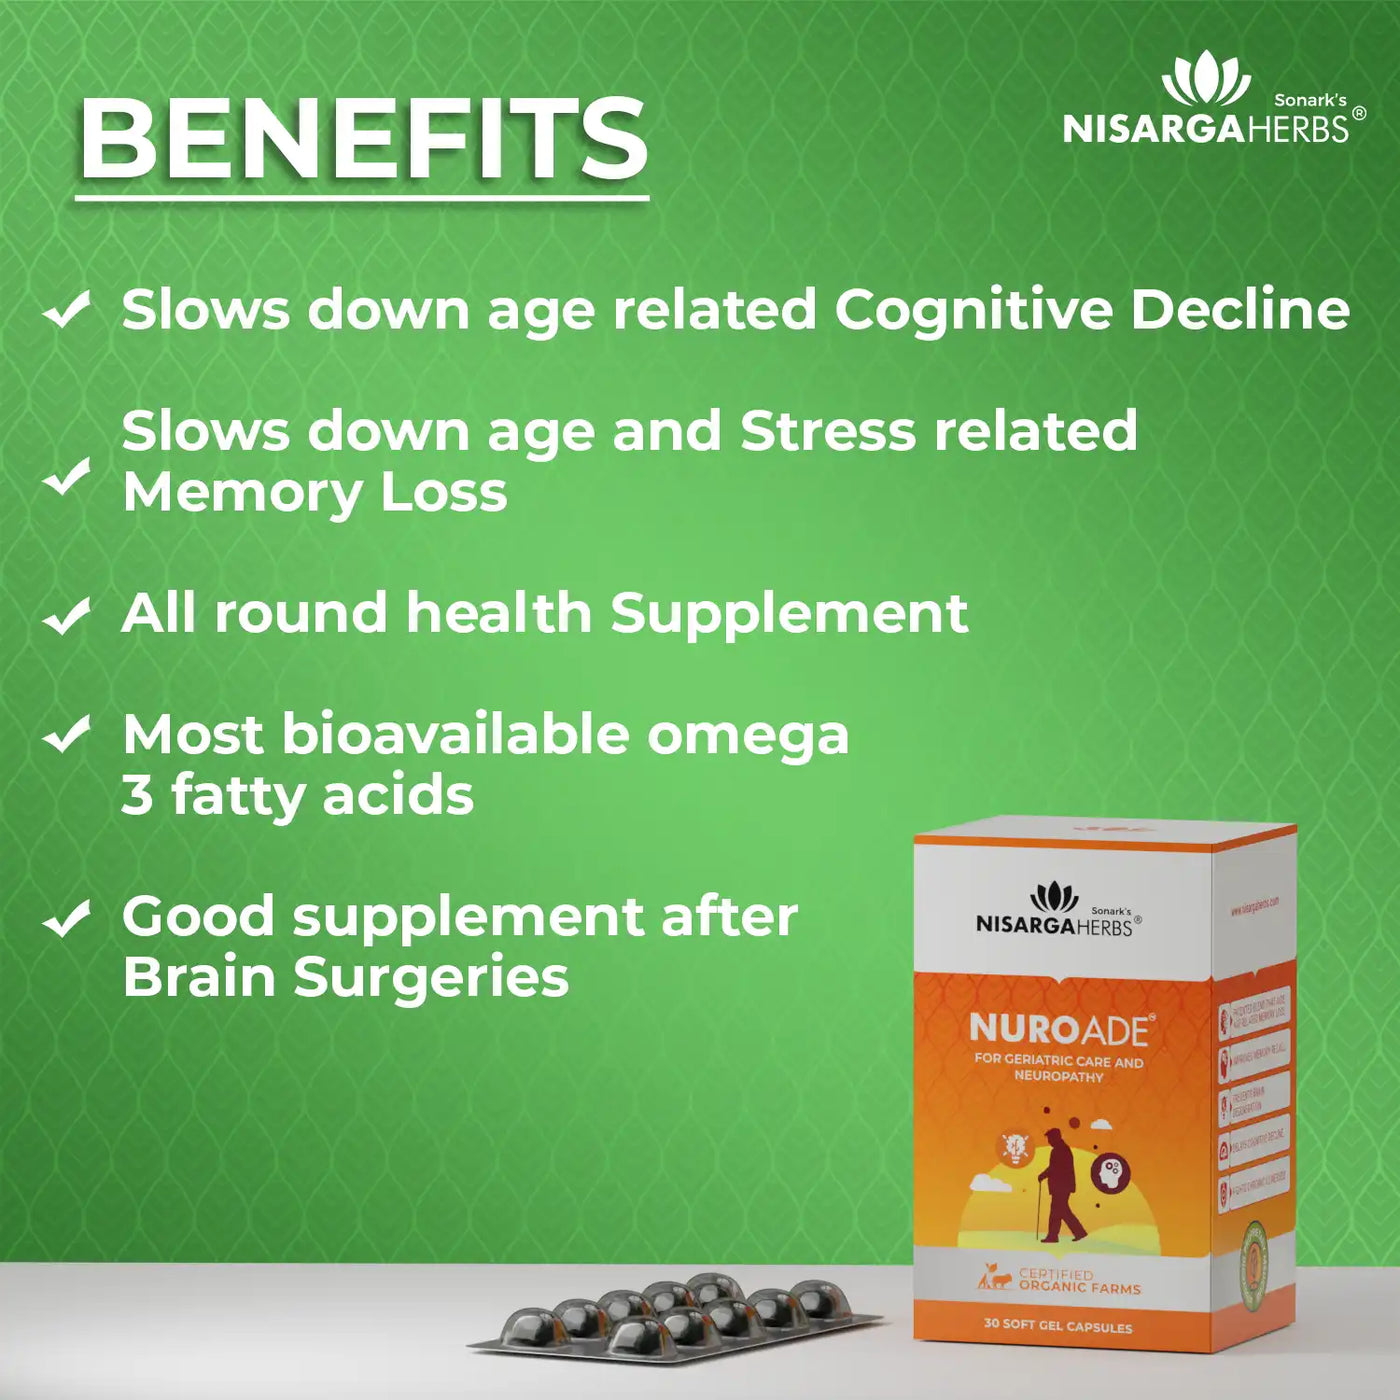 benefits of nuroade capsules for reducing forgetfulness, memory loss, parkinsons and hungtingtons disease symptoms, highly bioavailable omega 3 acids and great product for vericose veins and recovery after brain surgery